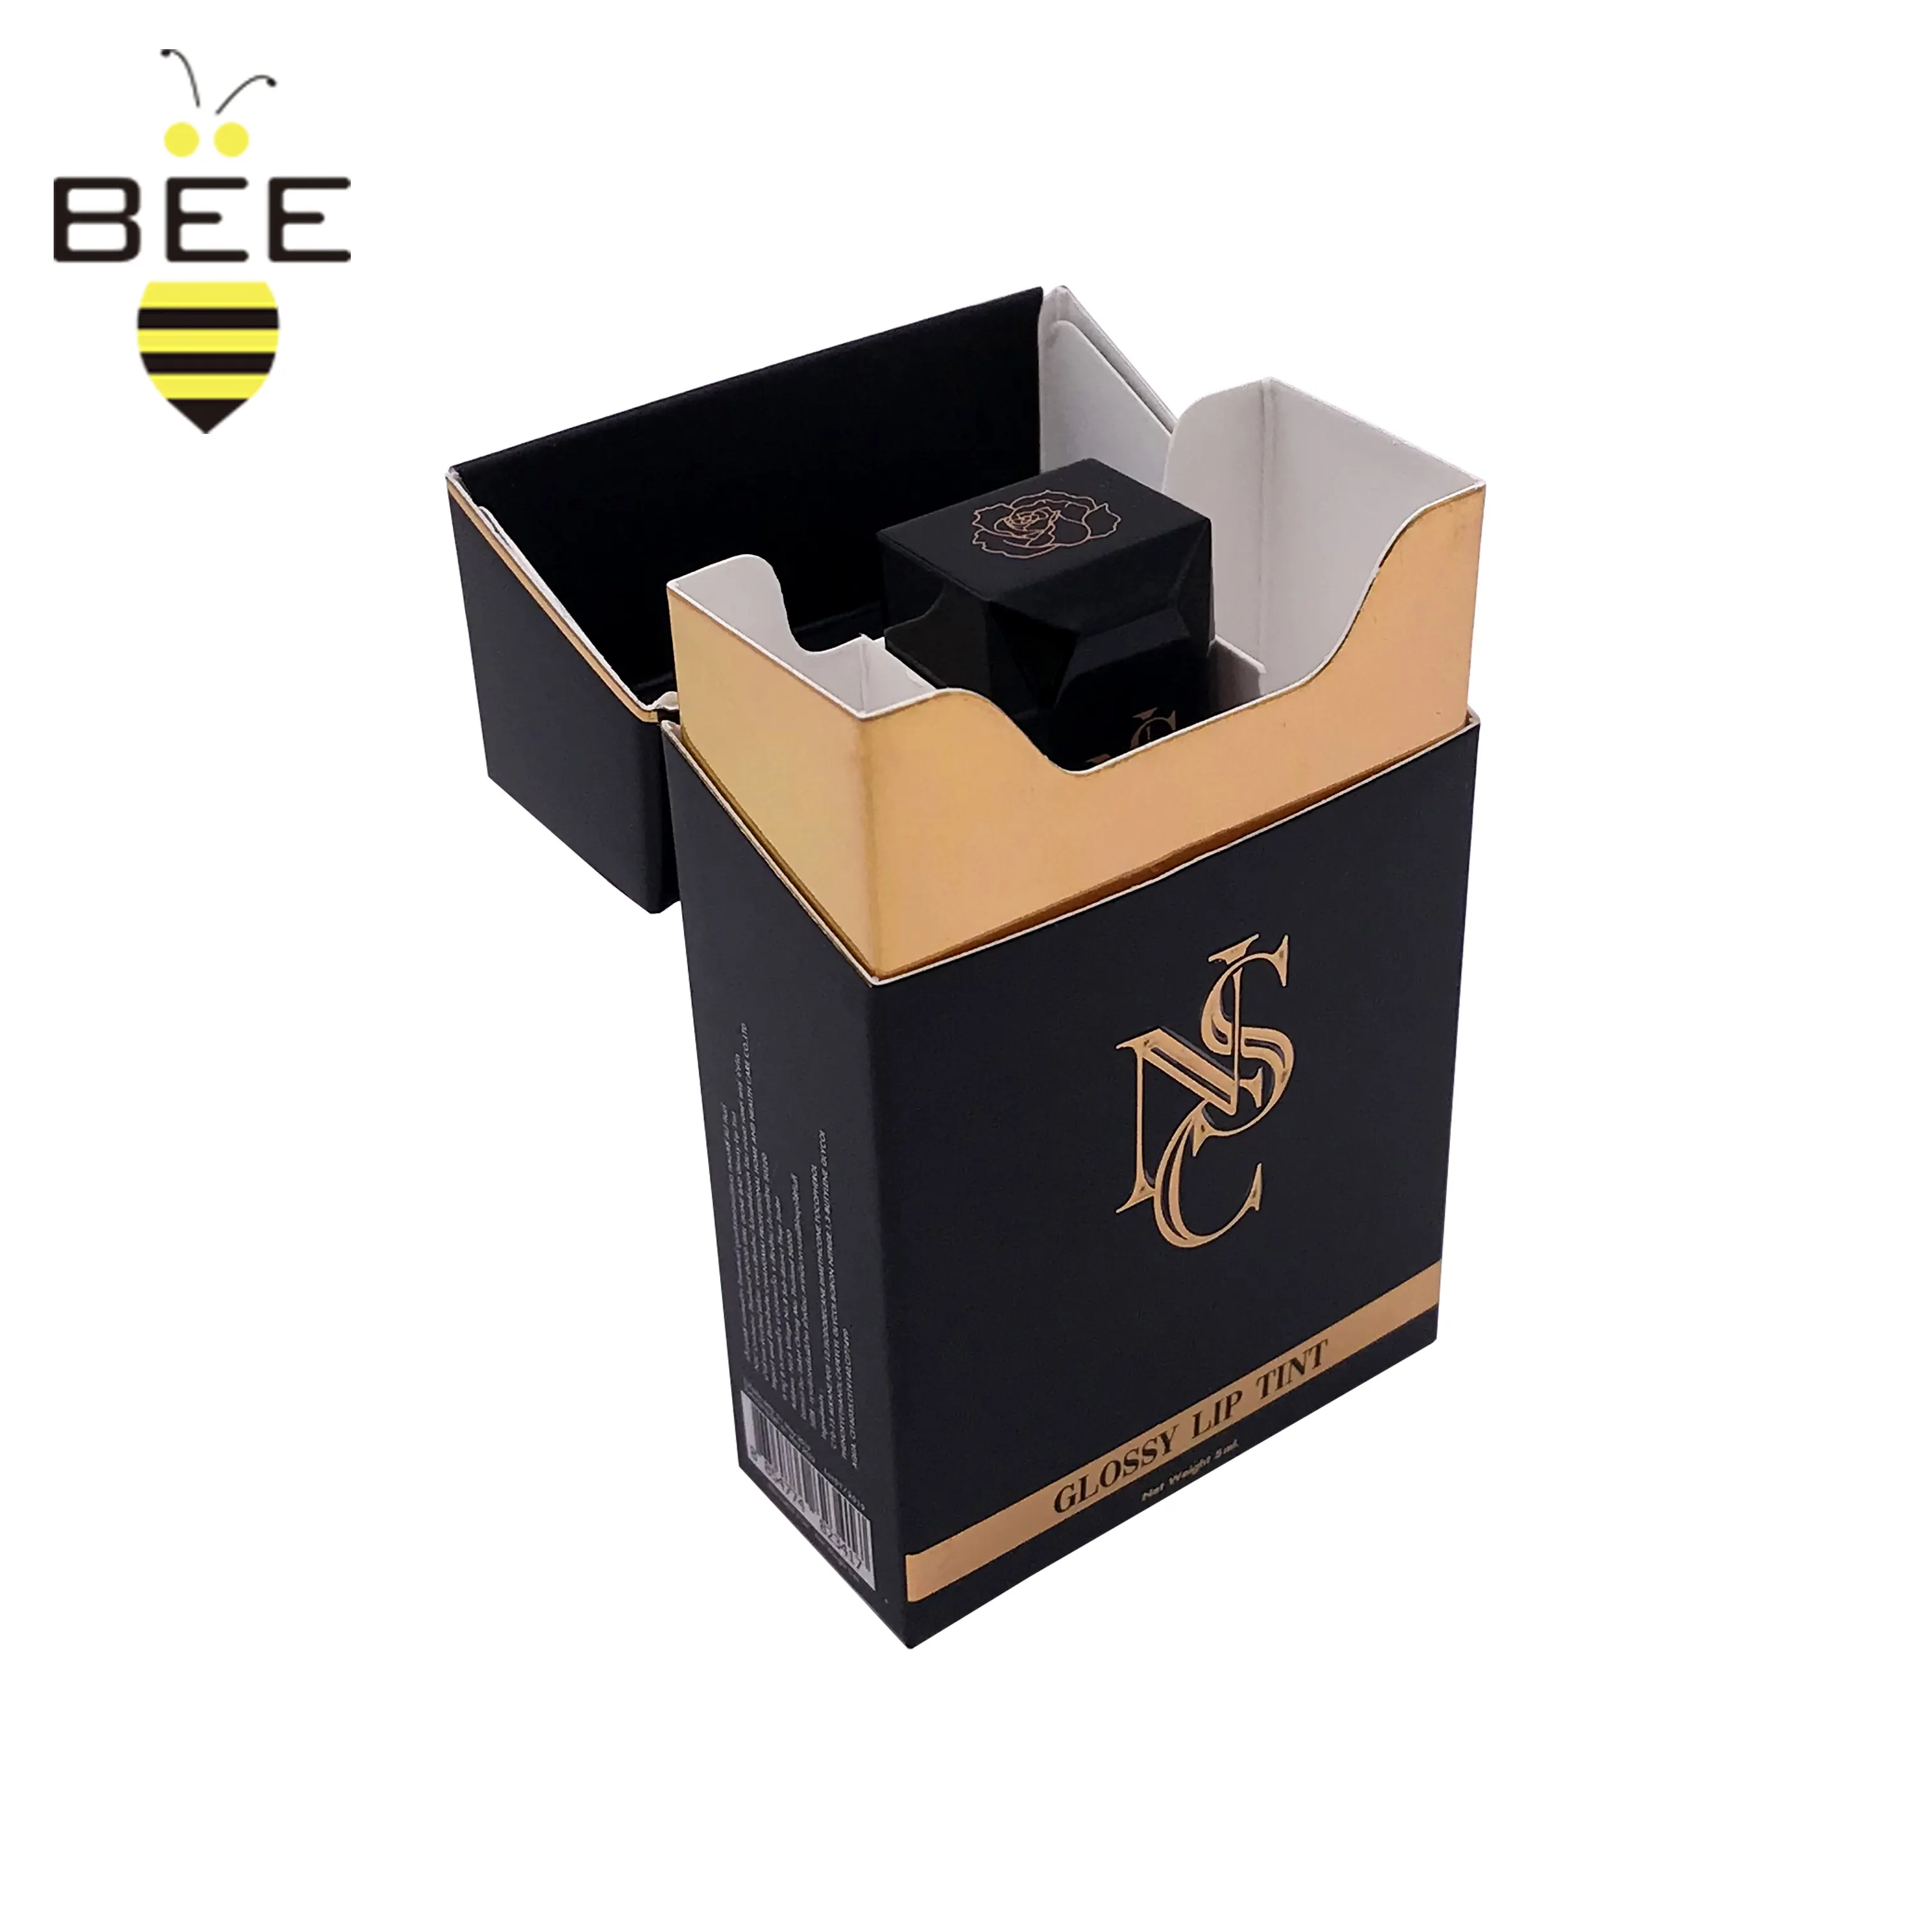 Special shaped perfume Design Cardboard creative Paper Small bottles packaging Box for Perfume lipstick folding style